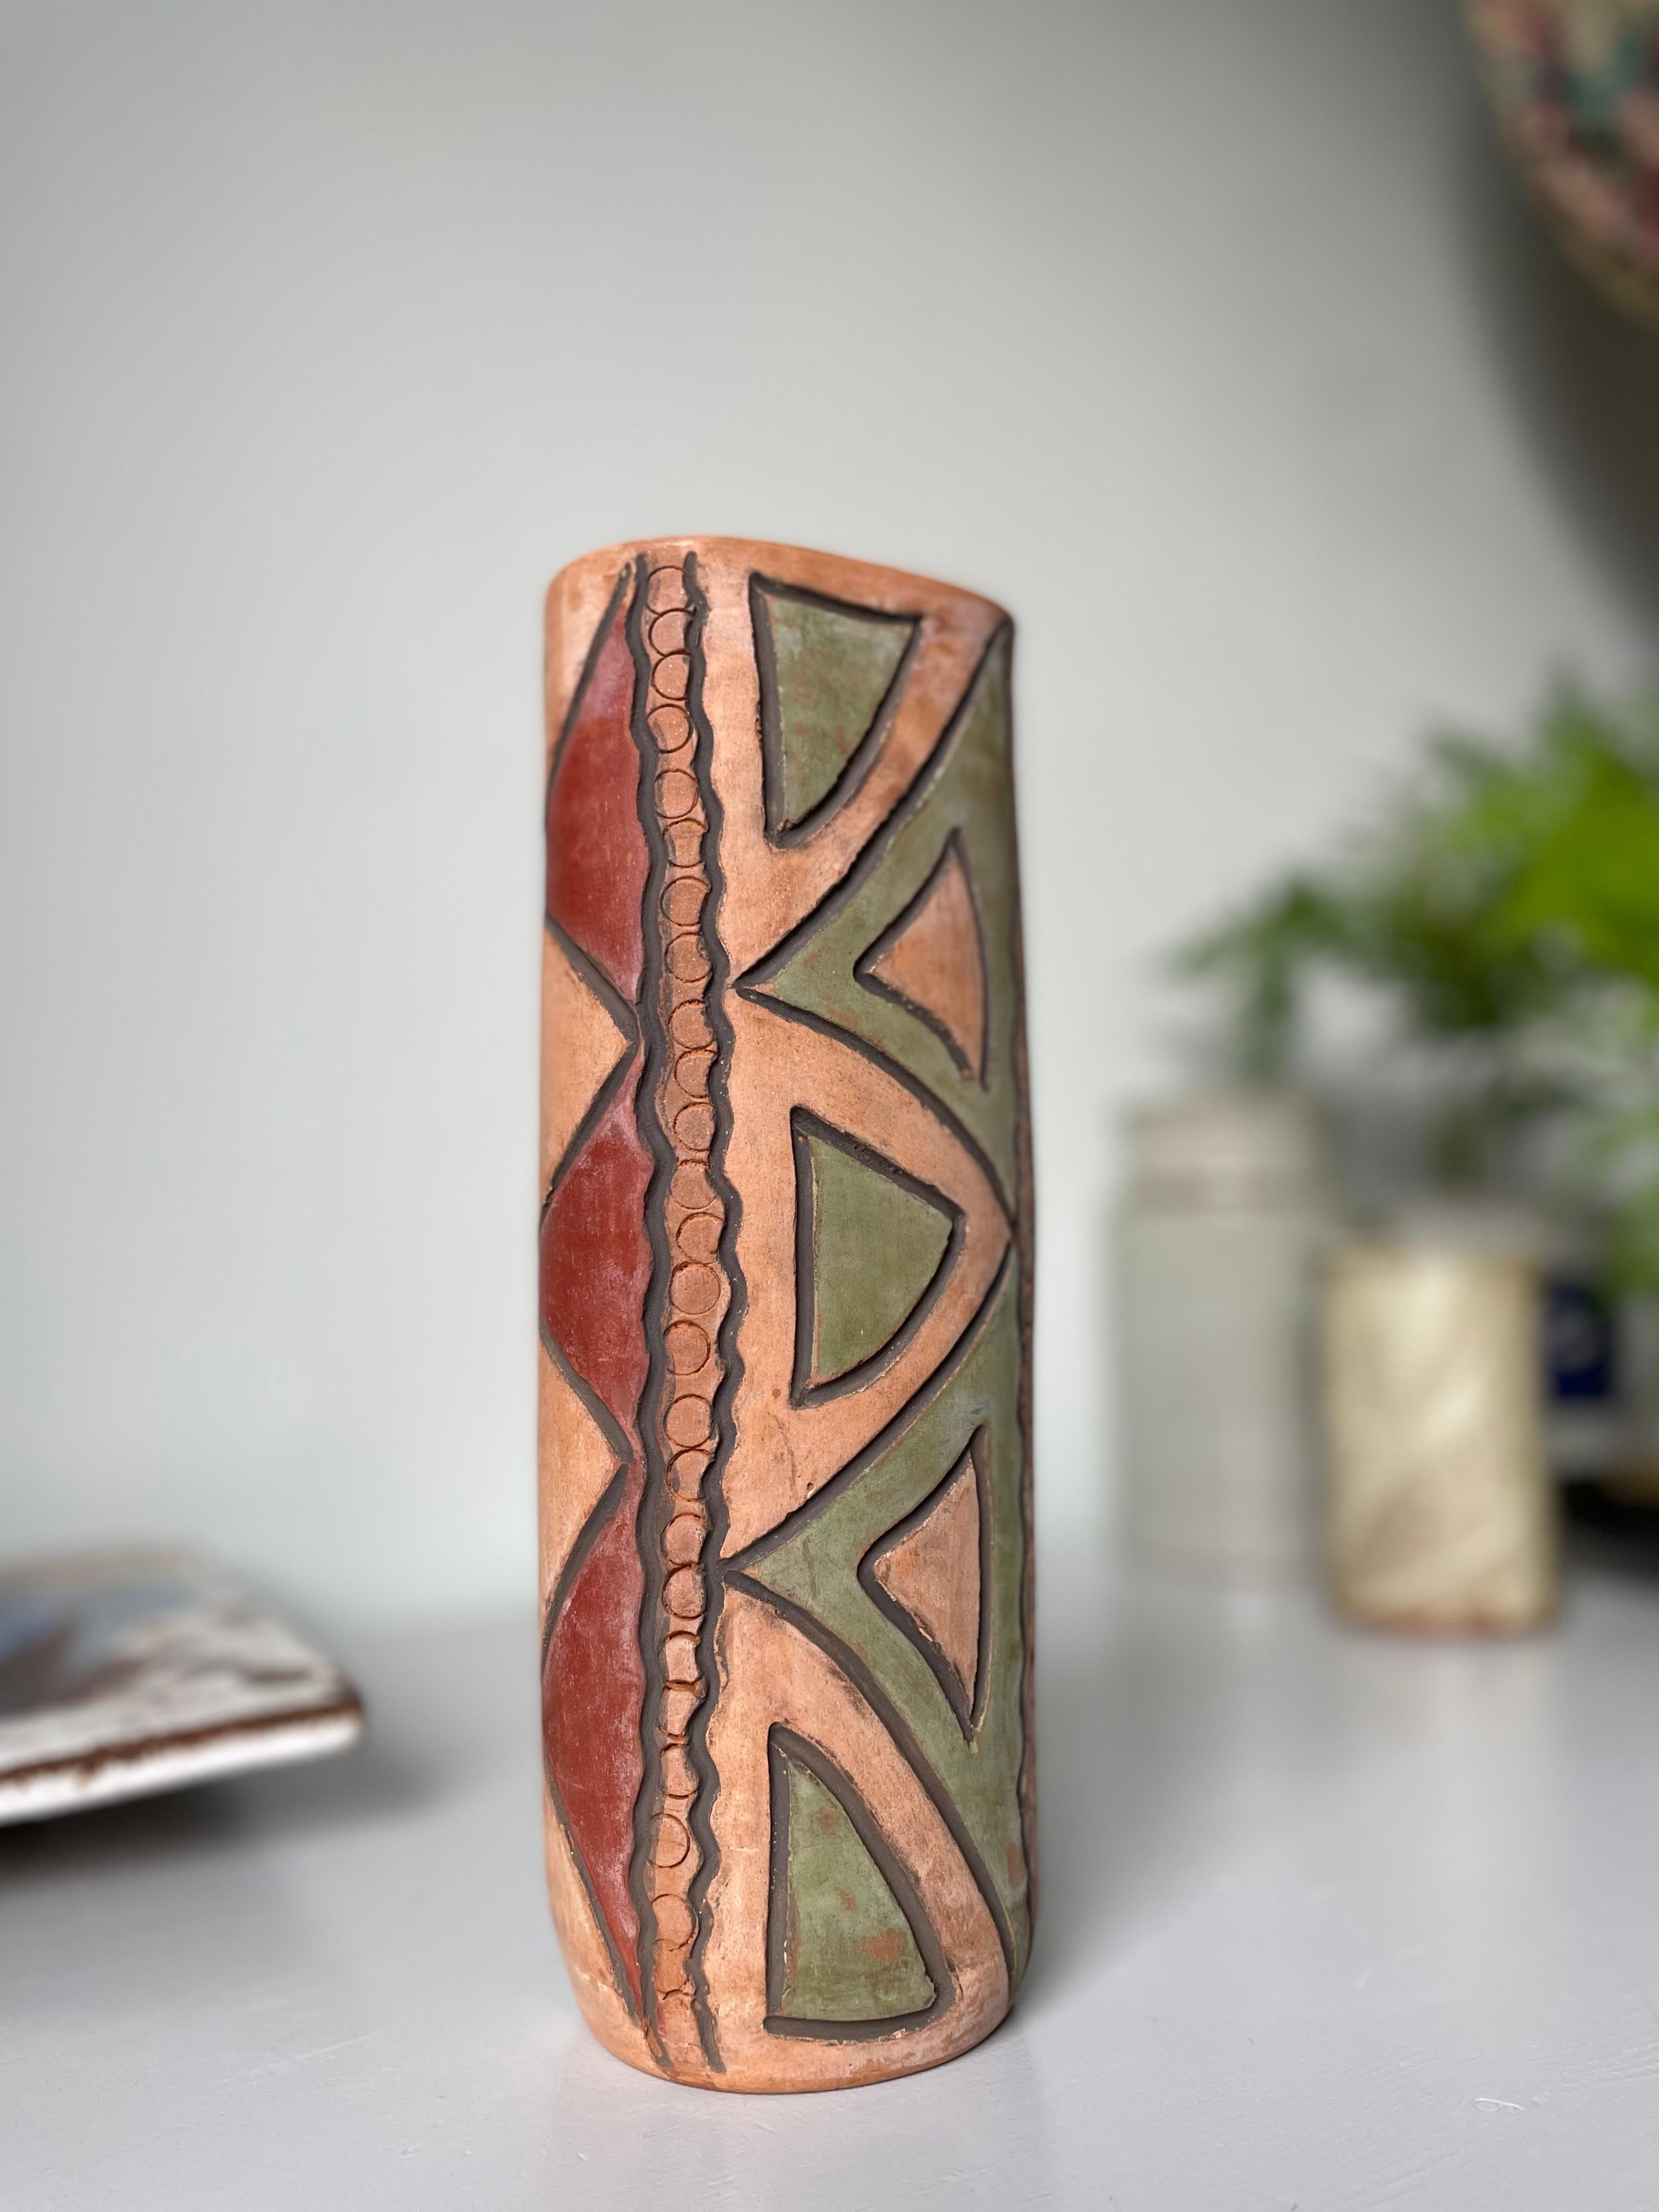 Unusual tall folkloristic ceramic earth toned vase with hand-carved geometric decor. Triangular burgundy and dusty green shapes on earth colored base with circular relief pattern and black wavy lines along the sides. Signed under base. Beautiful